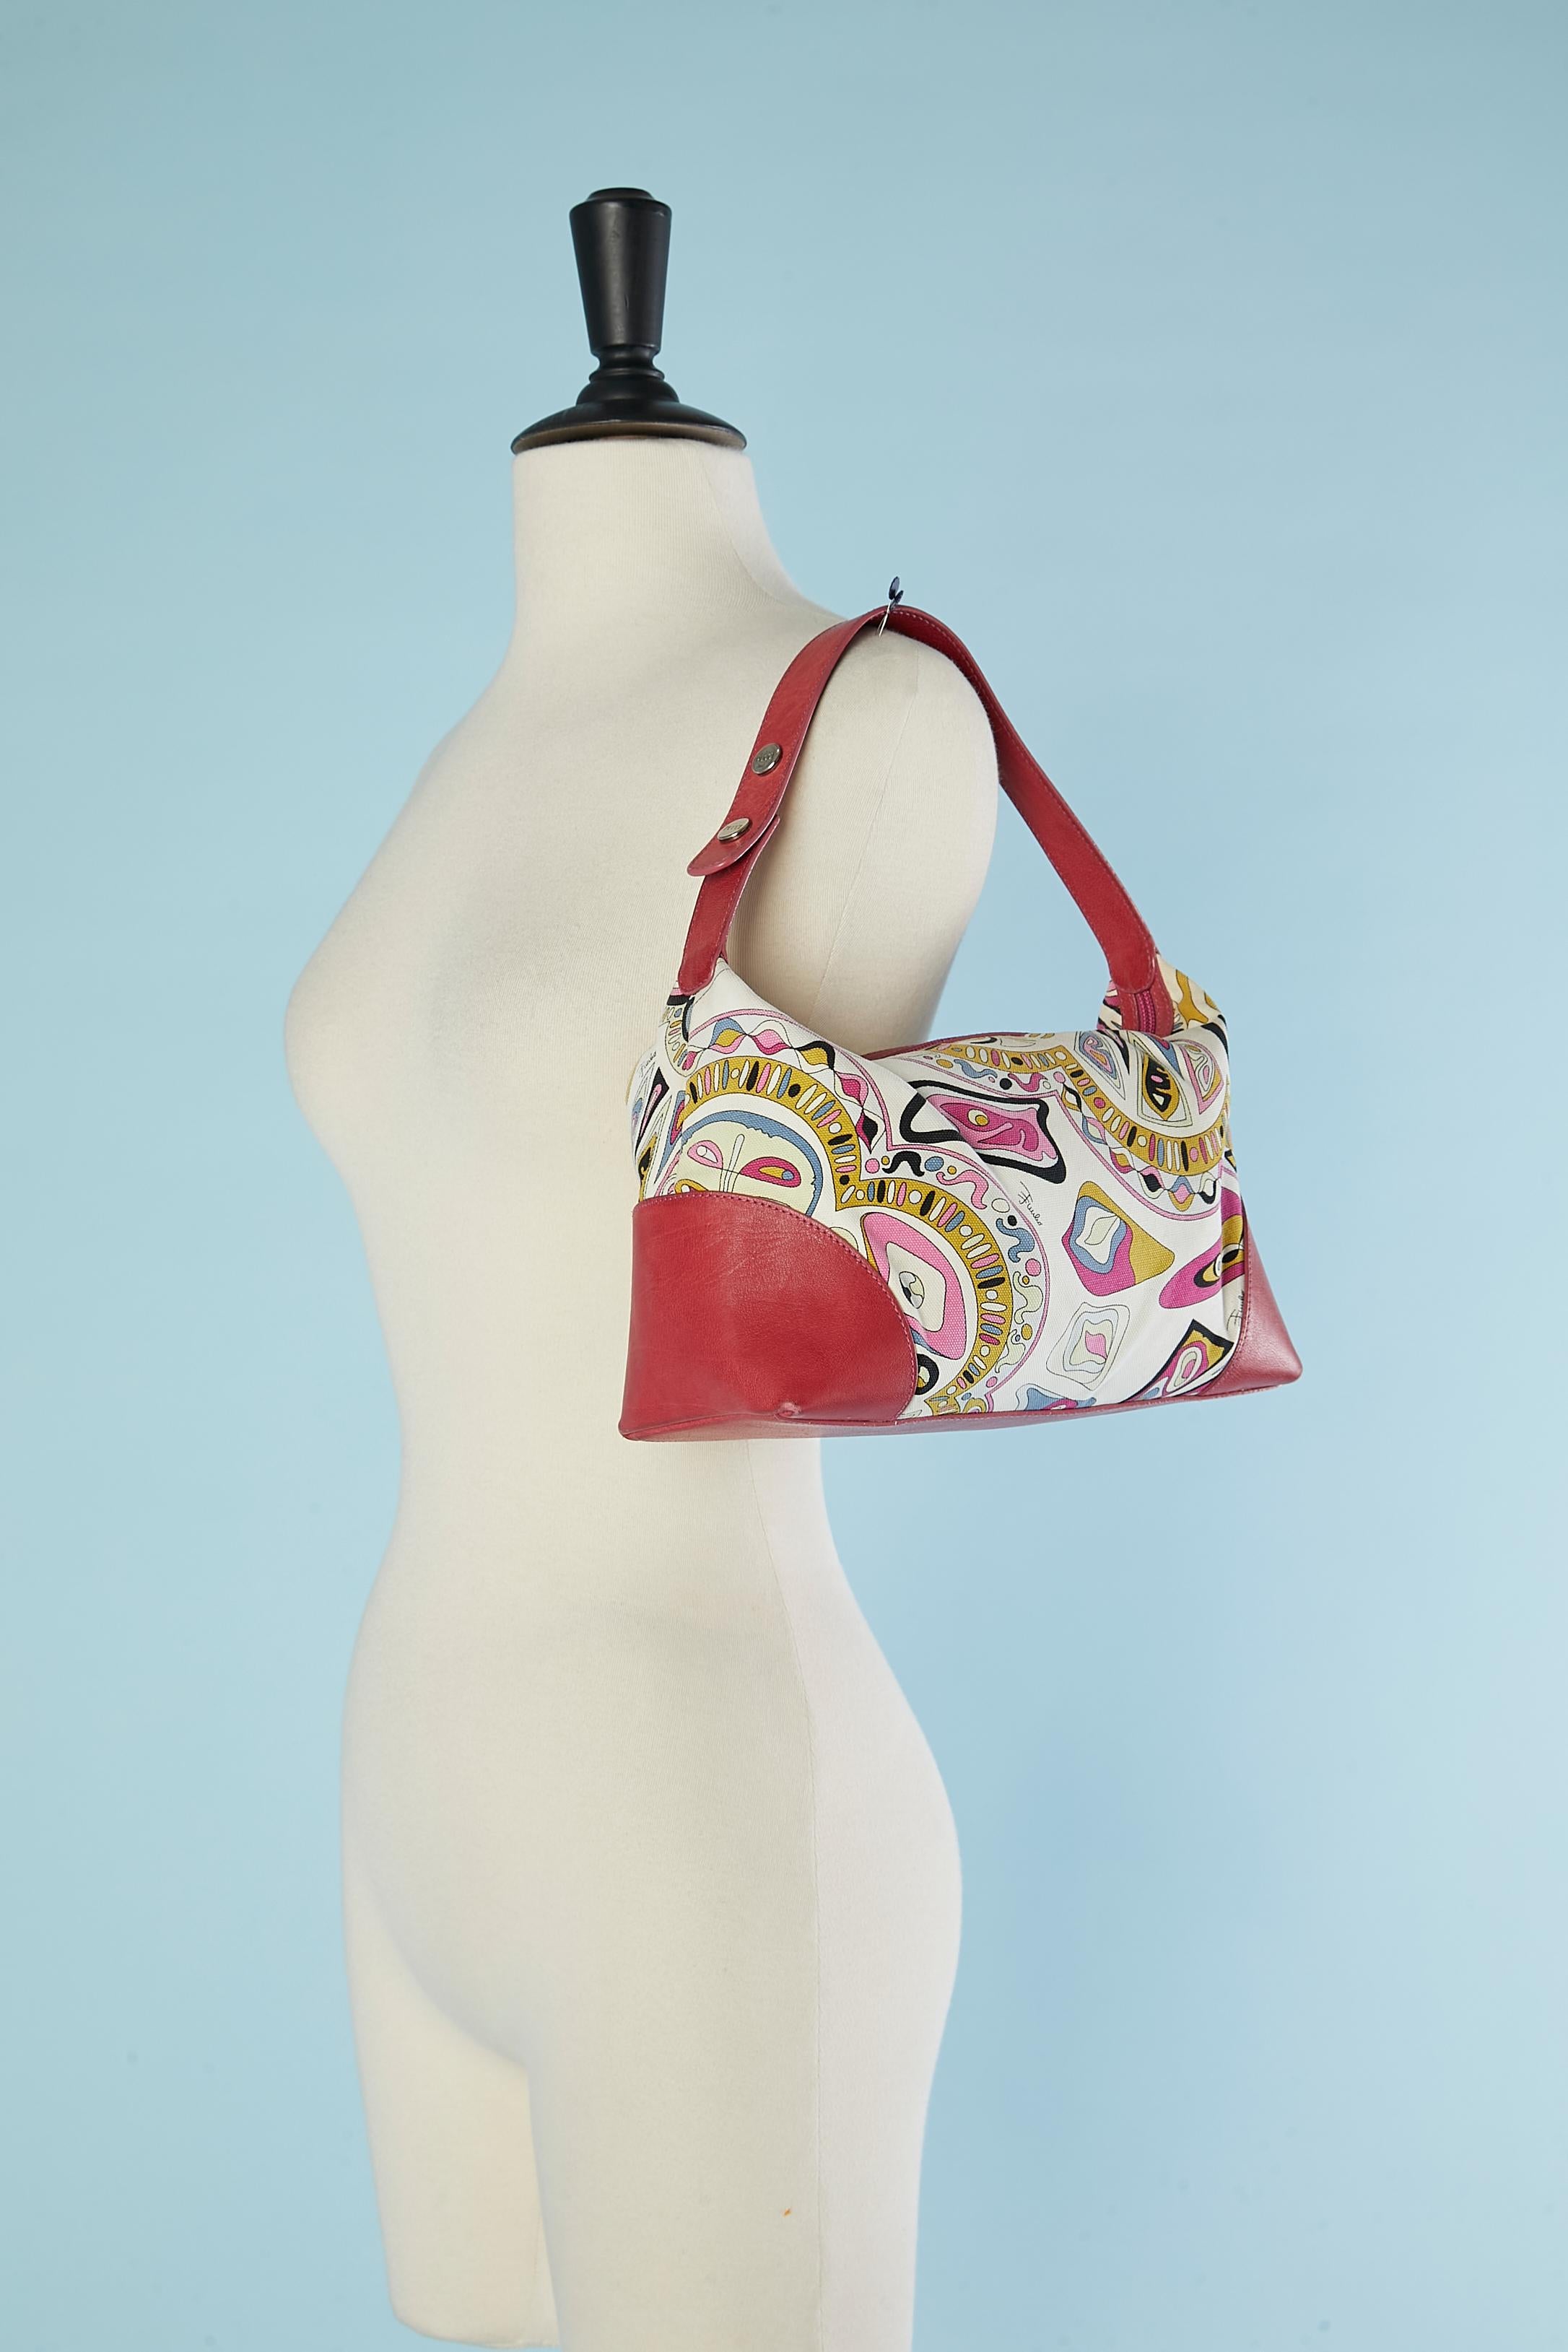 Printed canevas and red leather handbag Emilio PUCCI  For Sale 2